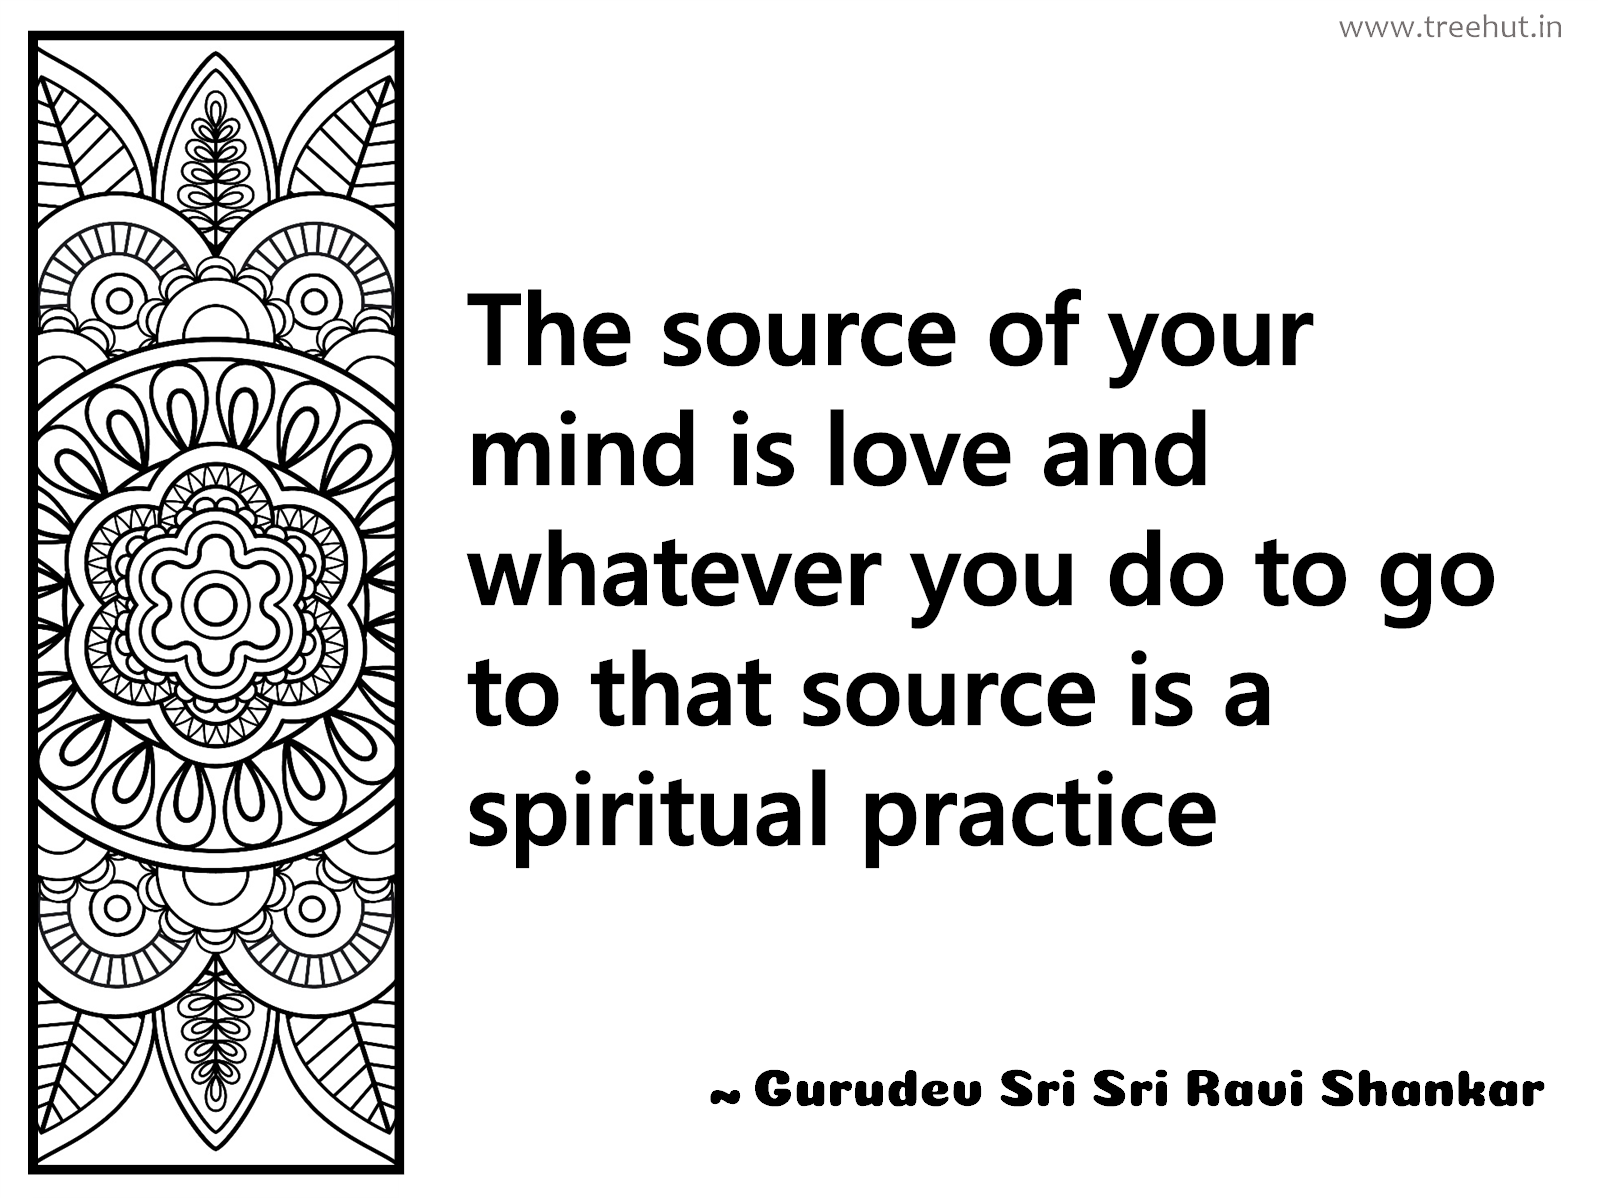 The source of your mind is love and whatever you do to go to that source is a spiritual practice Inspirational Quote by Gurudev Sri Sri Ravi Shankar, coloring pages